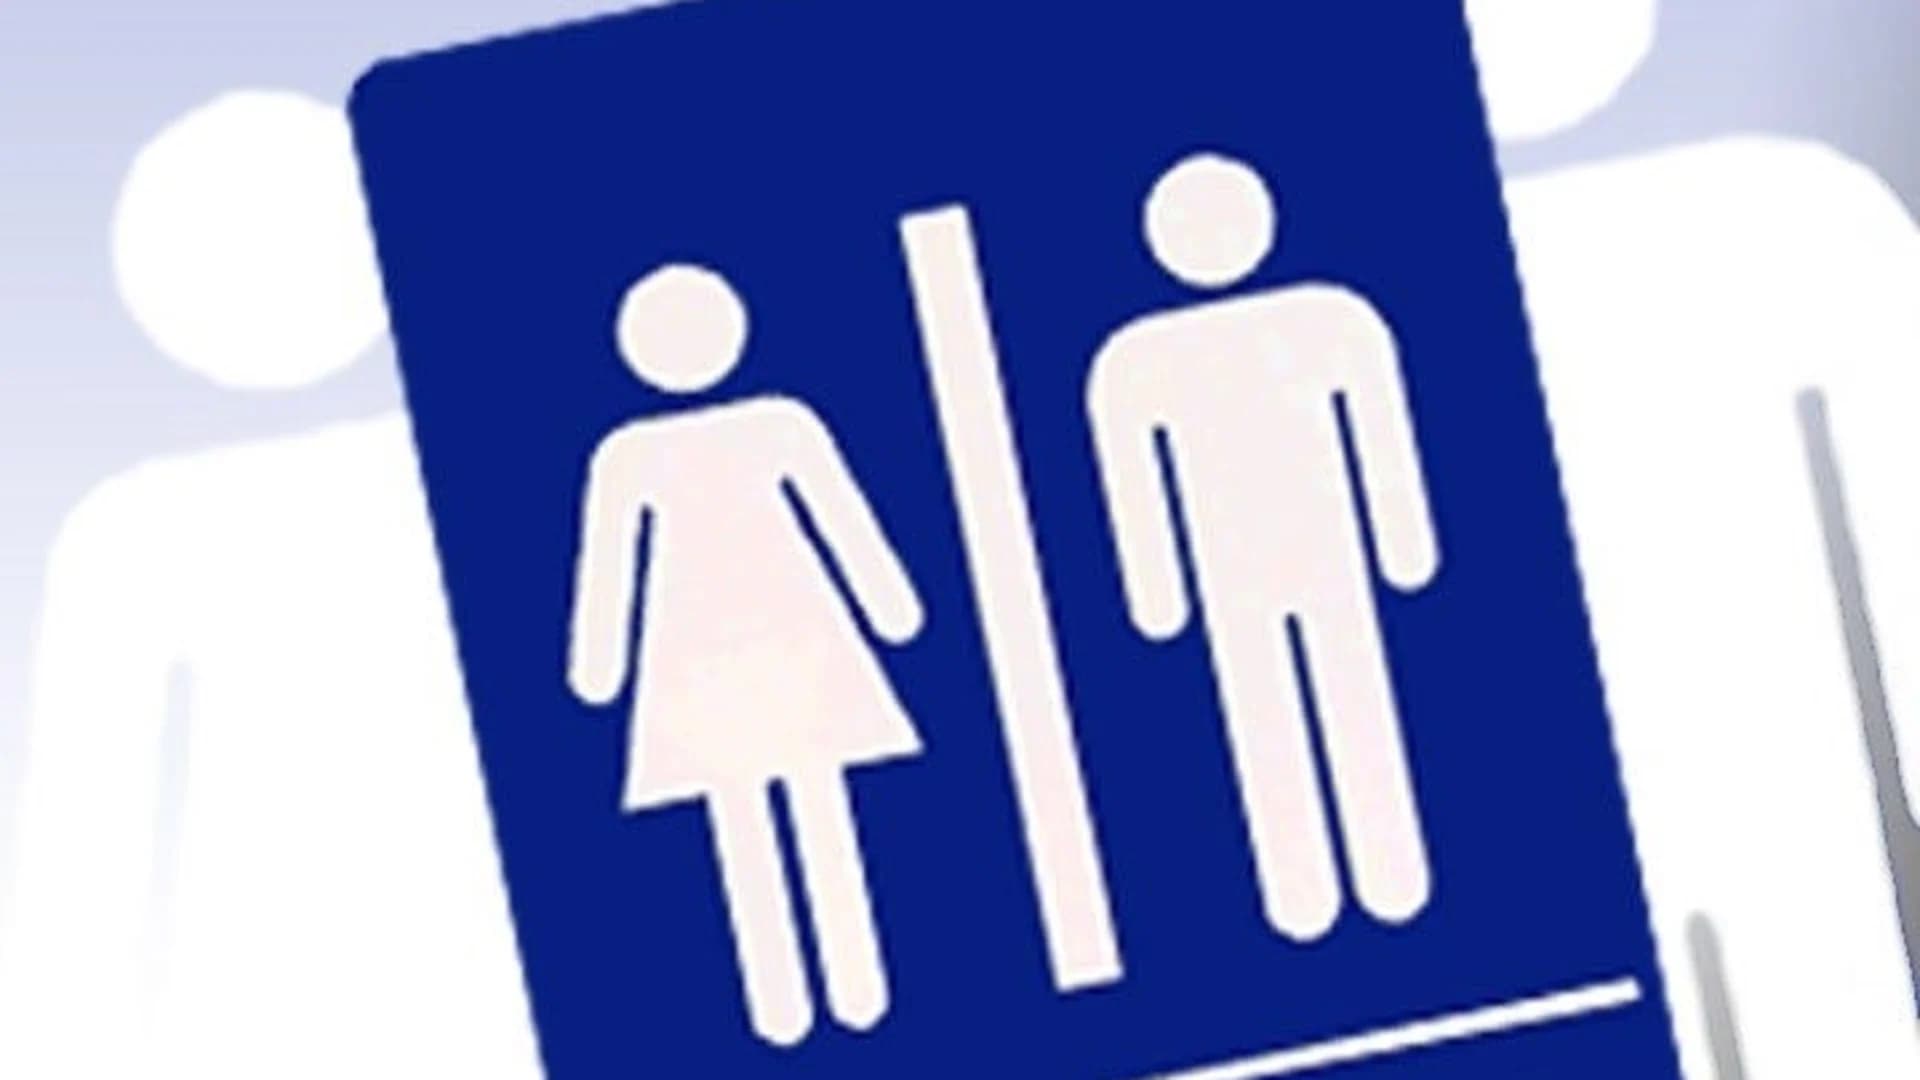 Connecticut Board of Regents approves transgender bathroom access policy